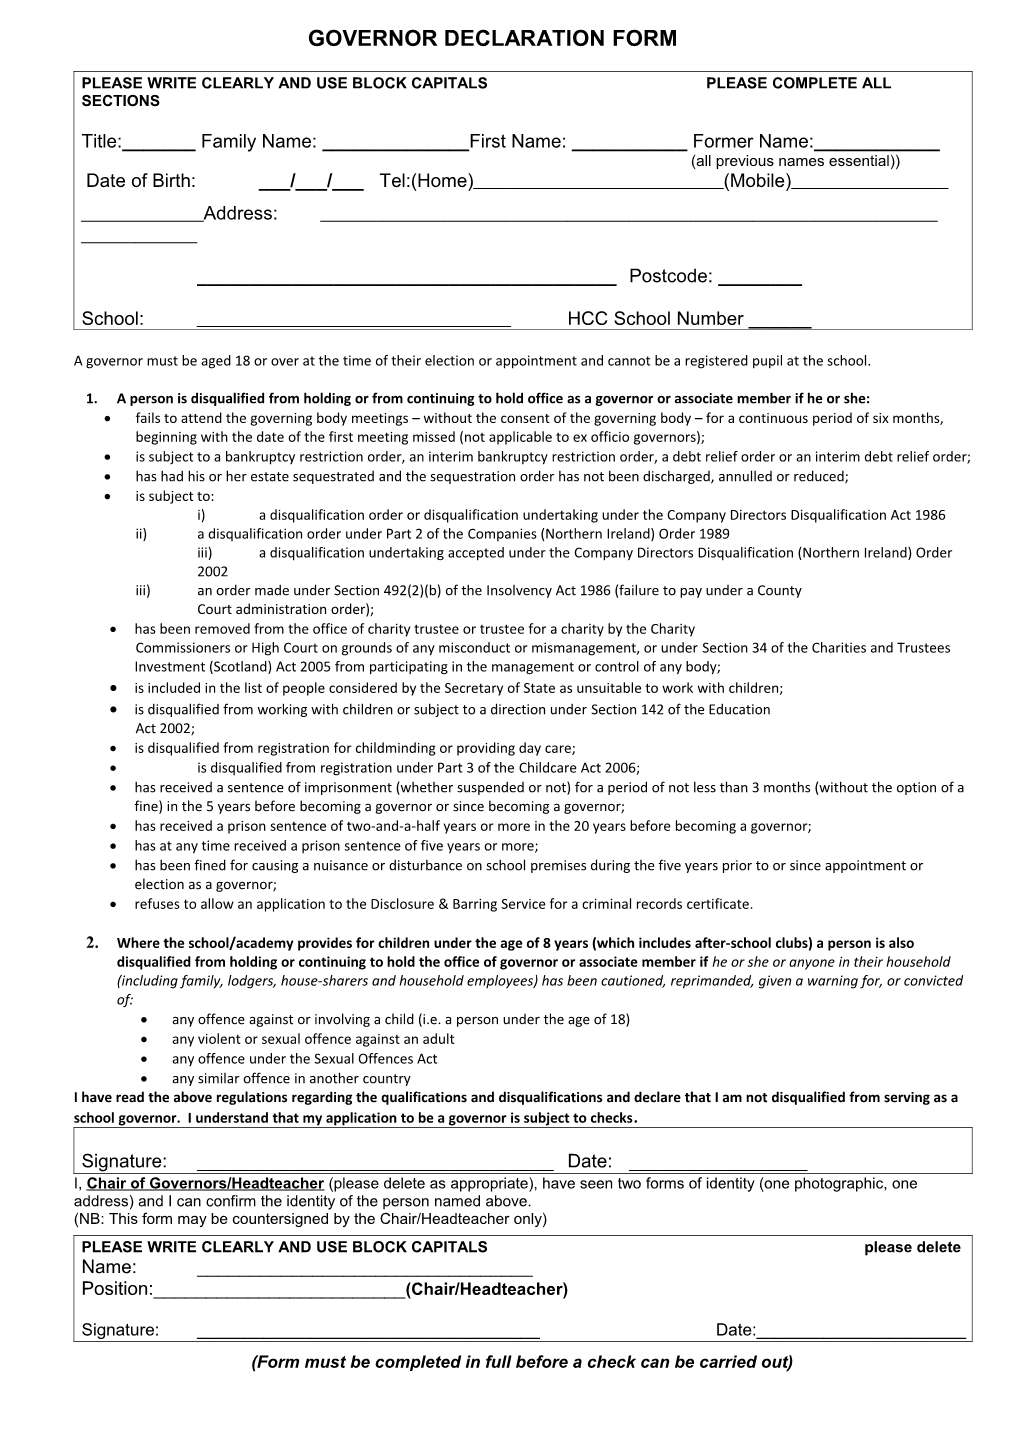 Governor Pre-Appointment Check Declaration Form